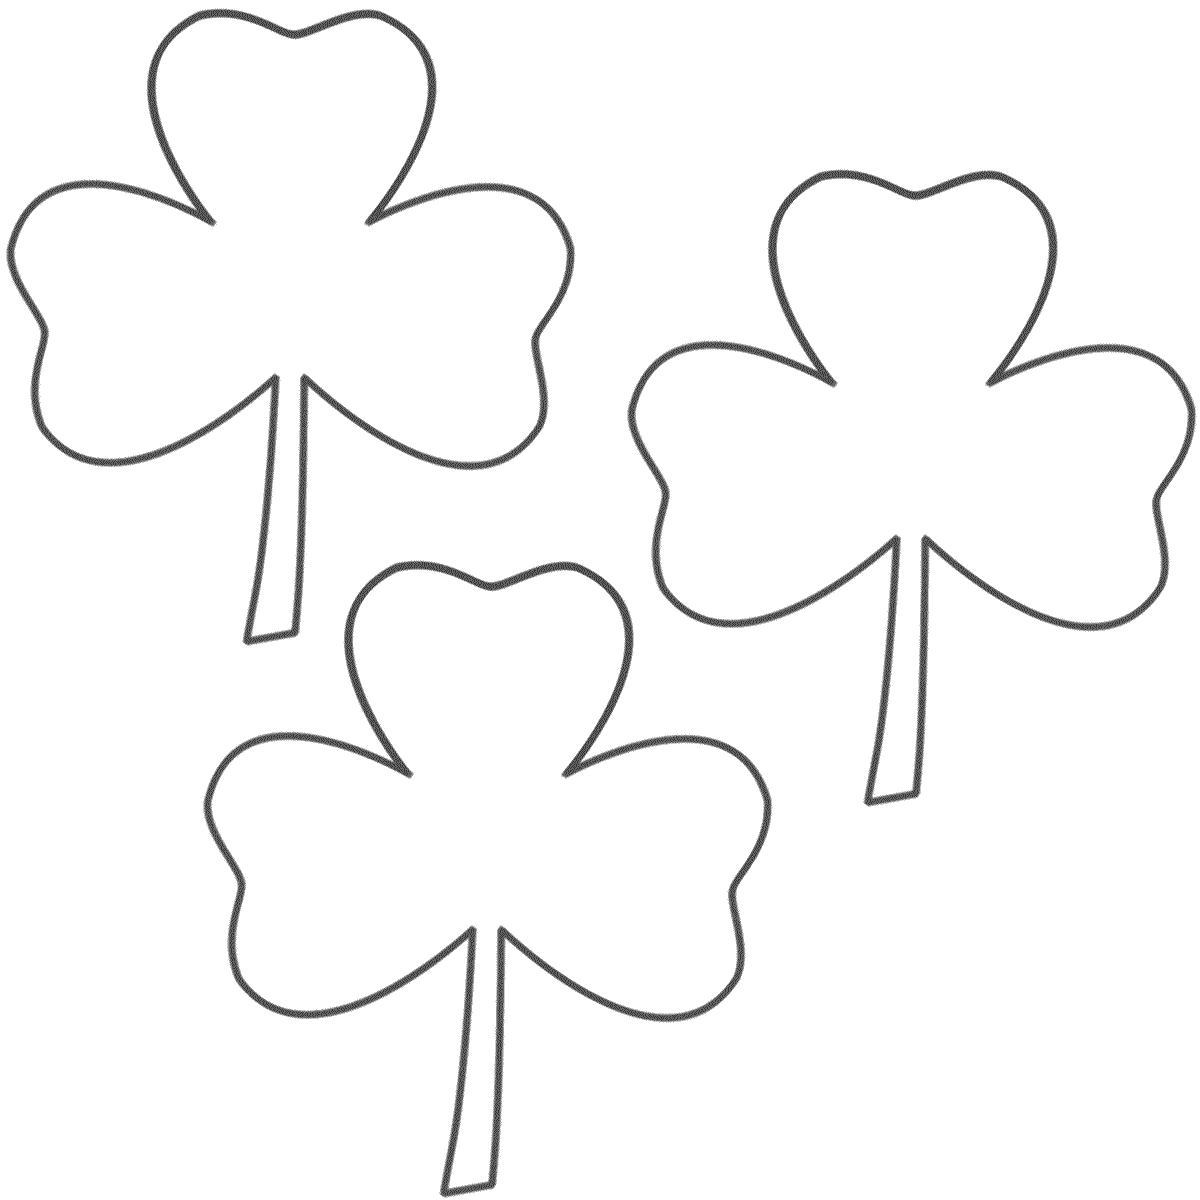 Three Leaf Clovers (3 clovers) - Coloring Page (St. Patrick's Day)